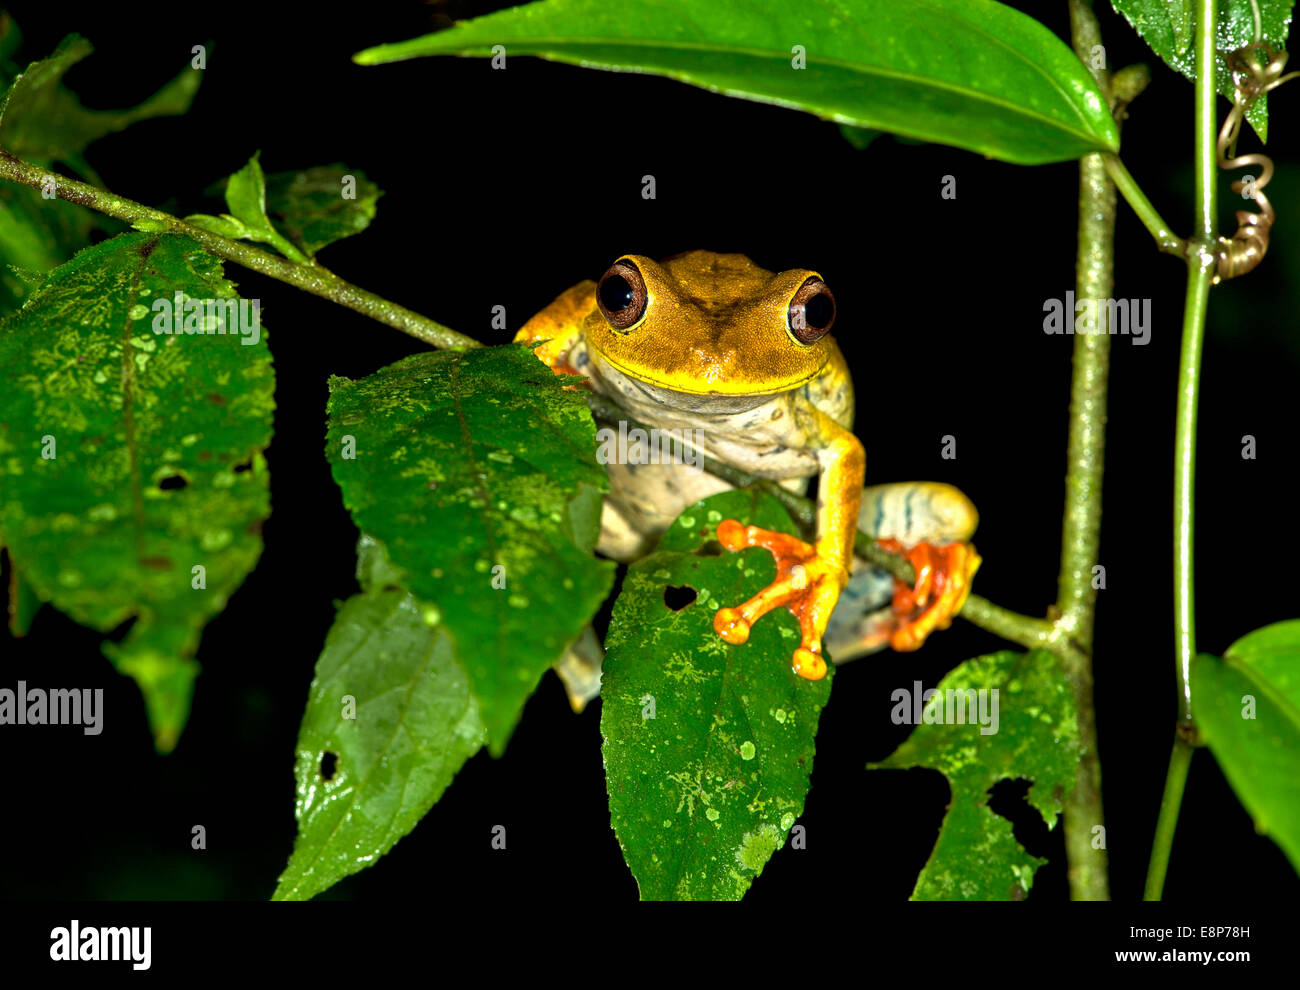 Map tree frog (Hypsiboas geographicus), in habitat, Hylidae family, Tambopata Nature Reserve, Madre de Dios region, Peru Stock Photo